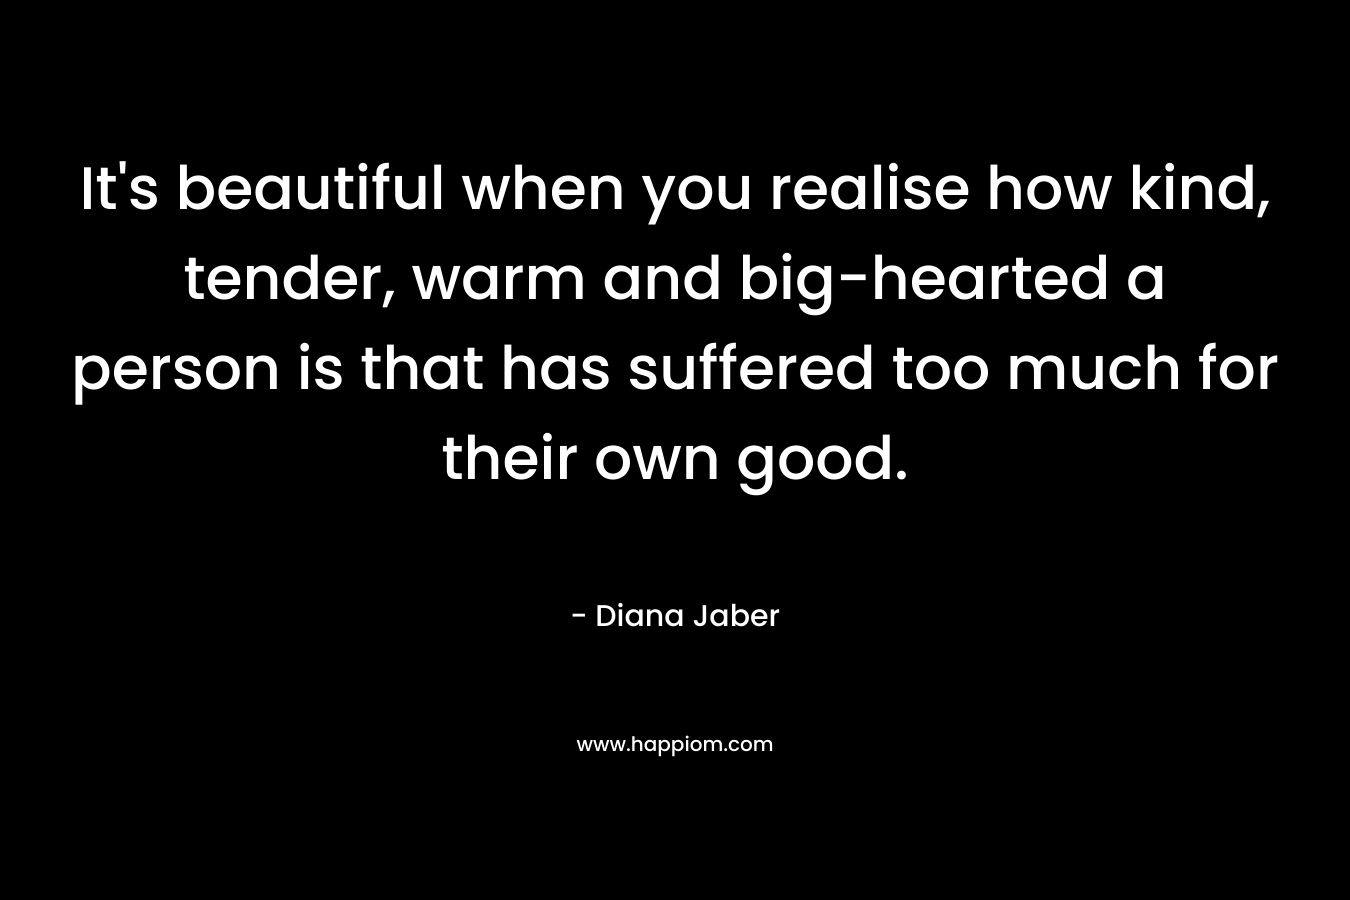 It’s beautiful when you realise how kind, tender, warm and big-hearted a person is that has suffered too much for their own good. – Diana Jaber